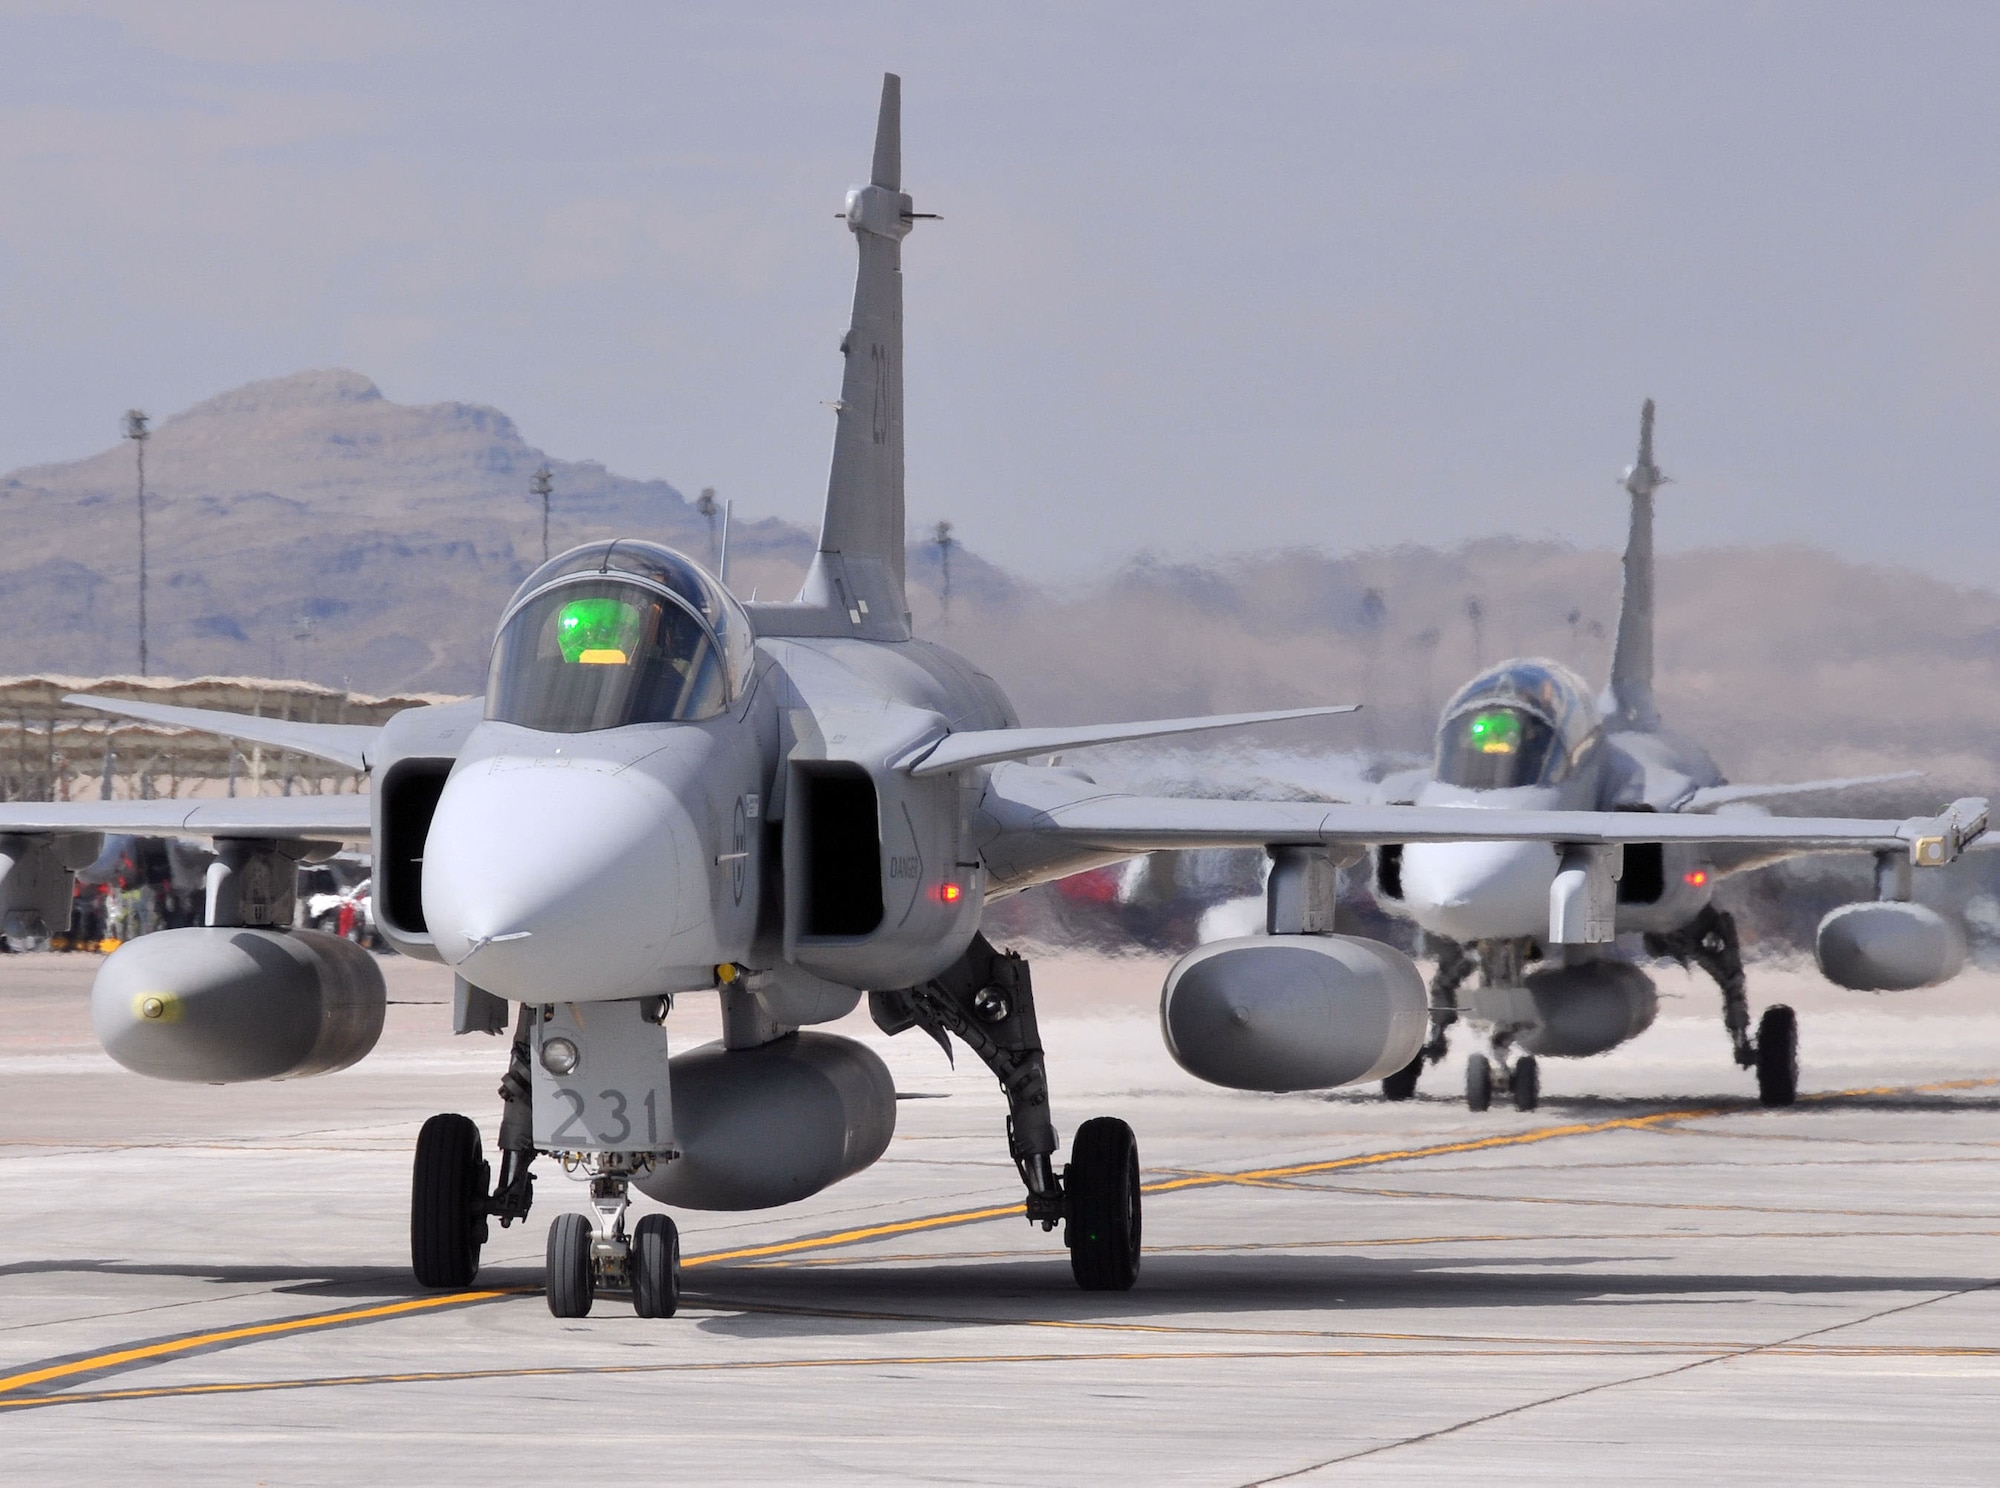 Swedish air force JAS 39 Gripen fighters arrive at Nellis AFB, Nev., on July 14 for Red Flag 08-3.  Seven Gripens and their crews, from the 212nd Fighter Squadron at Norrbotten Wing, Sweden, are participating in their first Red Flag exercise at Nellis.  Red Flag 08-3 runs July 19 - Aug. 2.  Aircraft from the Brazilian and Turkish air forces will join Swedish and U.S. forces for the exercise.  (U.S. Air Force photo by Chief Master Sgt. Gary Emery)